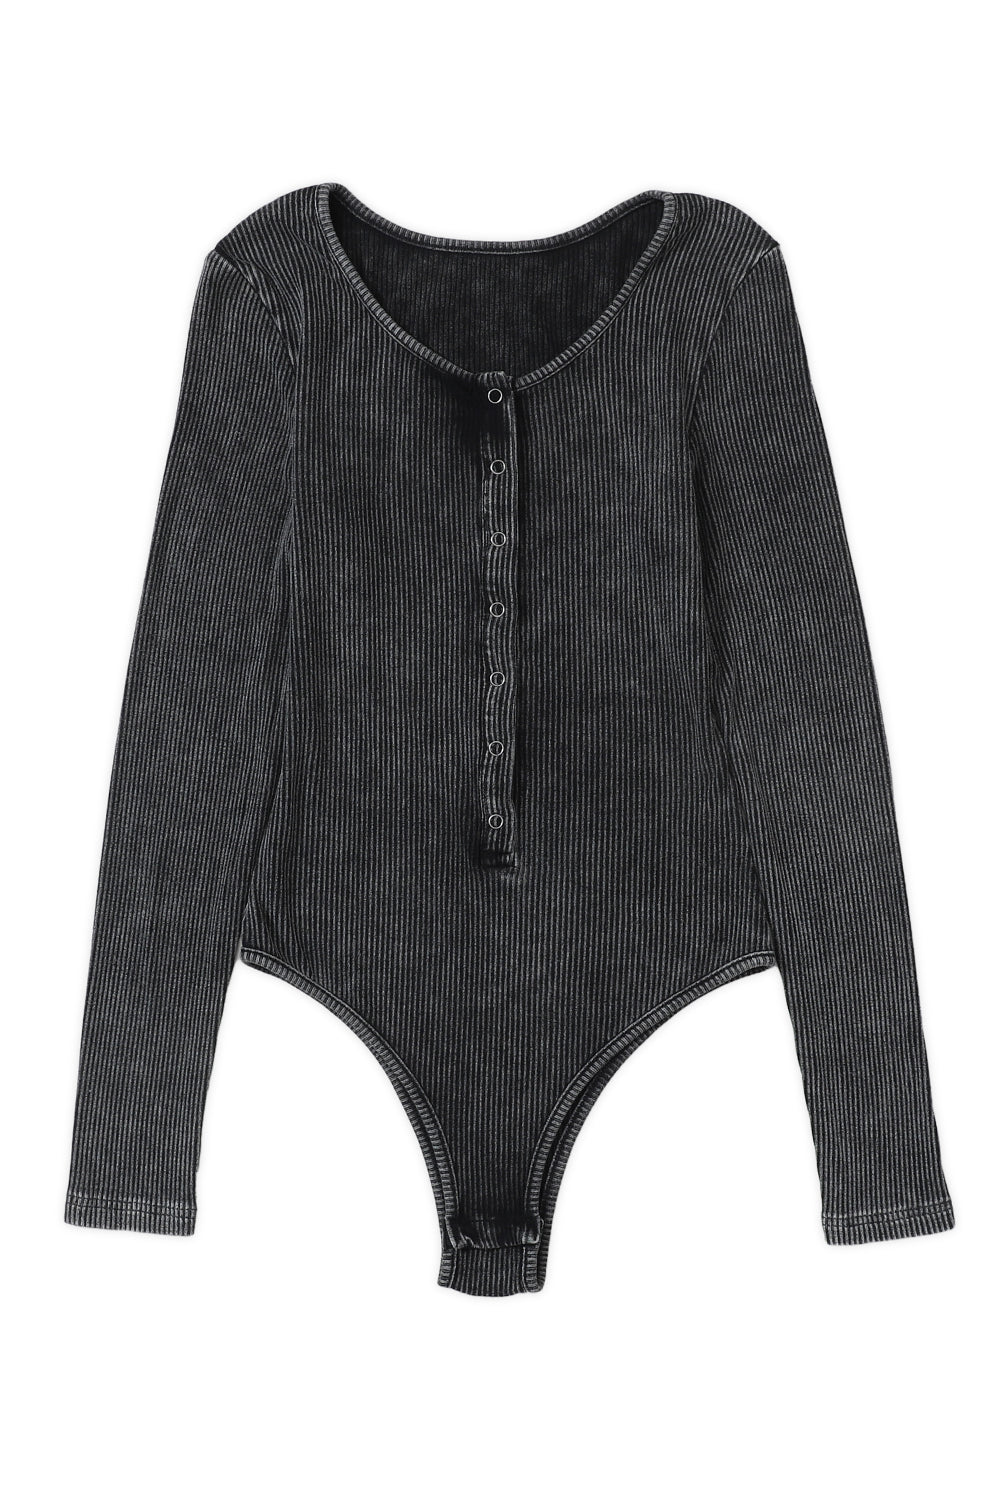 Black Mineral Wash Ribbed Snap Buttons Long Sleeve Bodysuit